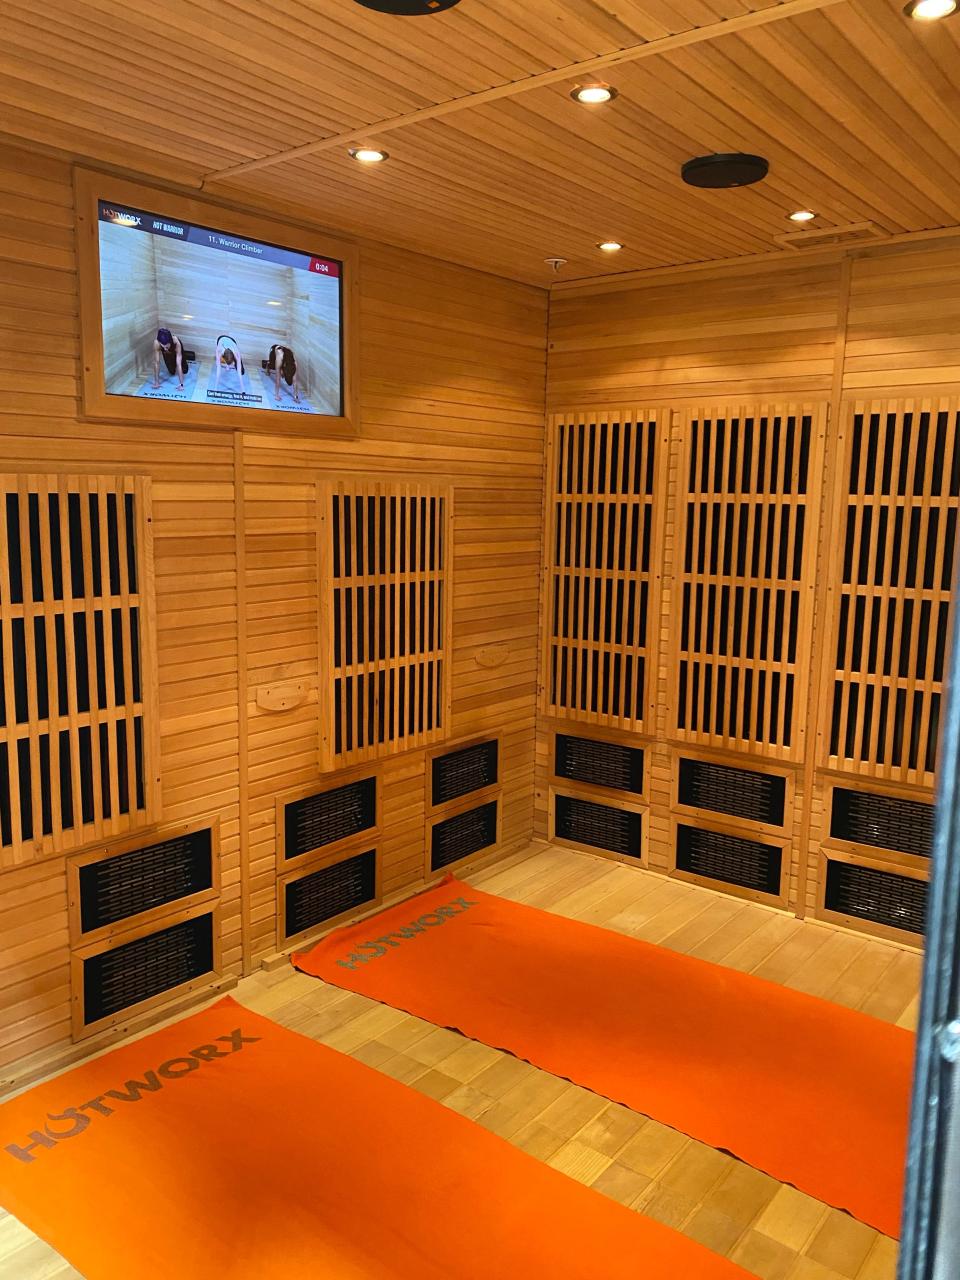 Hotworx studios are individual 9- to 12-foot cedar saunas that can be booked for a virtual infrared workout 24 hours a day, seven days a week.